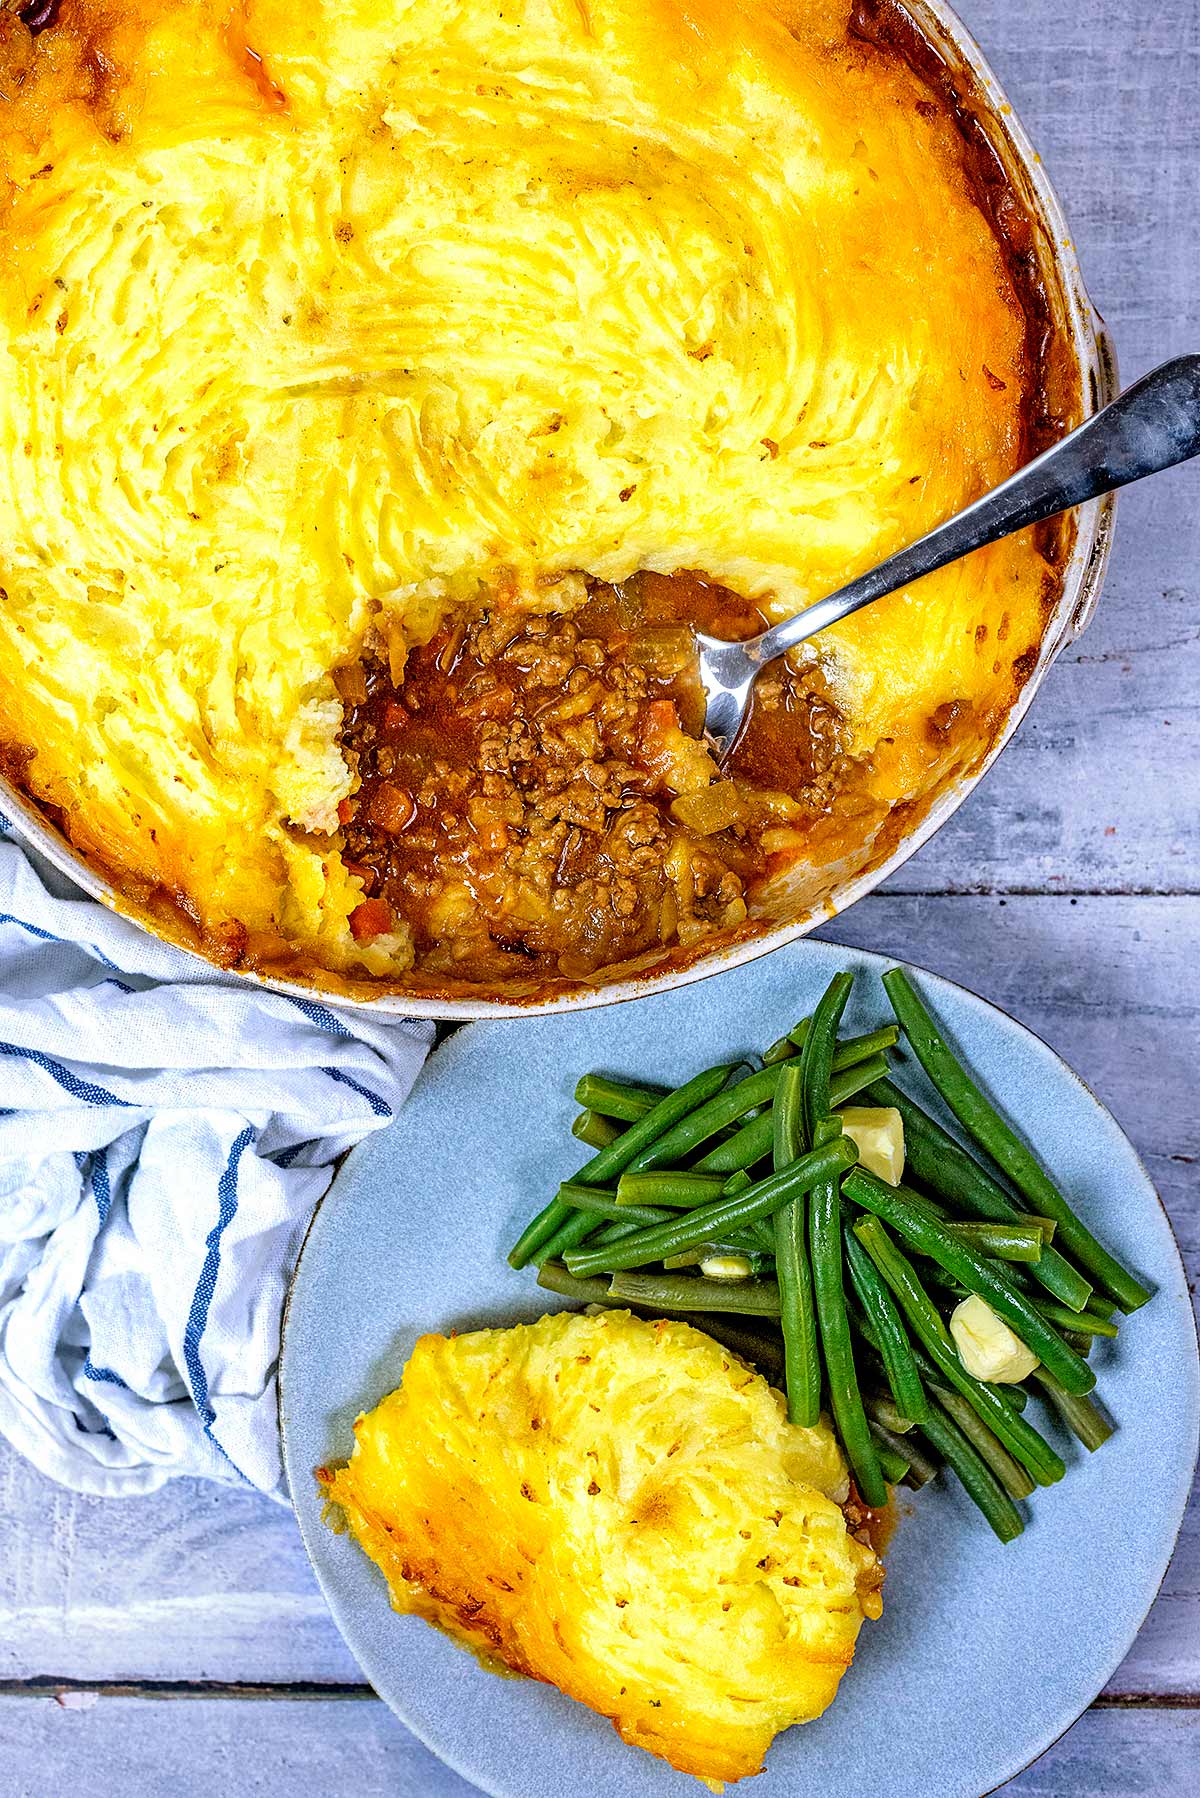 A large serving dish of shepherd's pie next to a plate of more pie and some green beans.